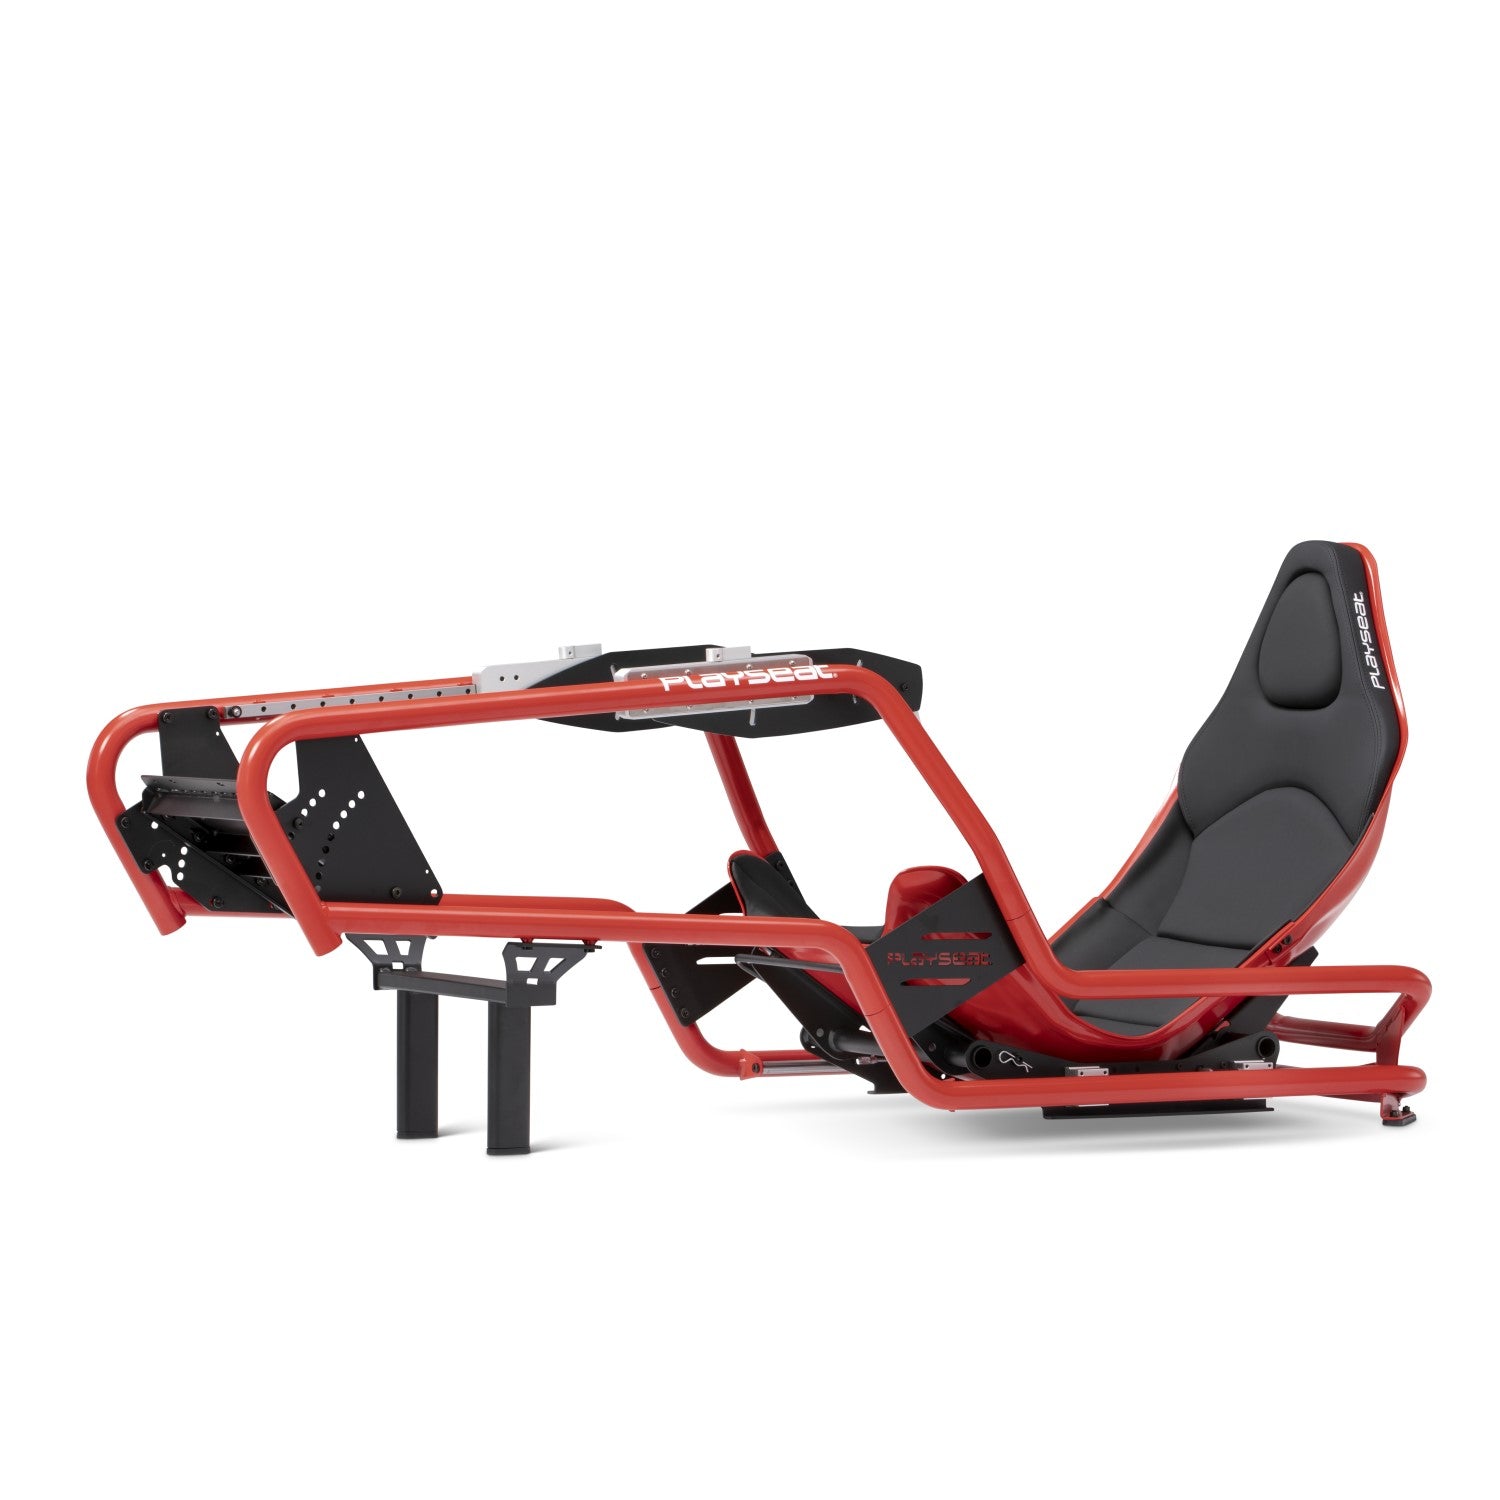 The official Playseat® website